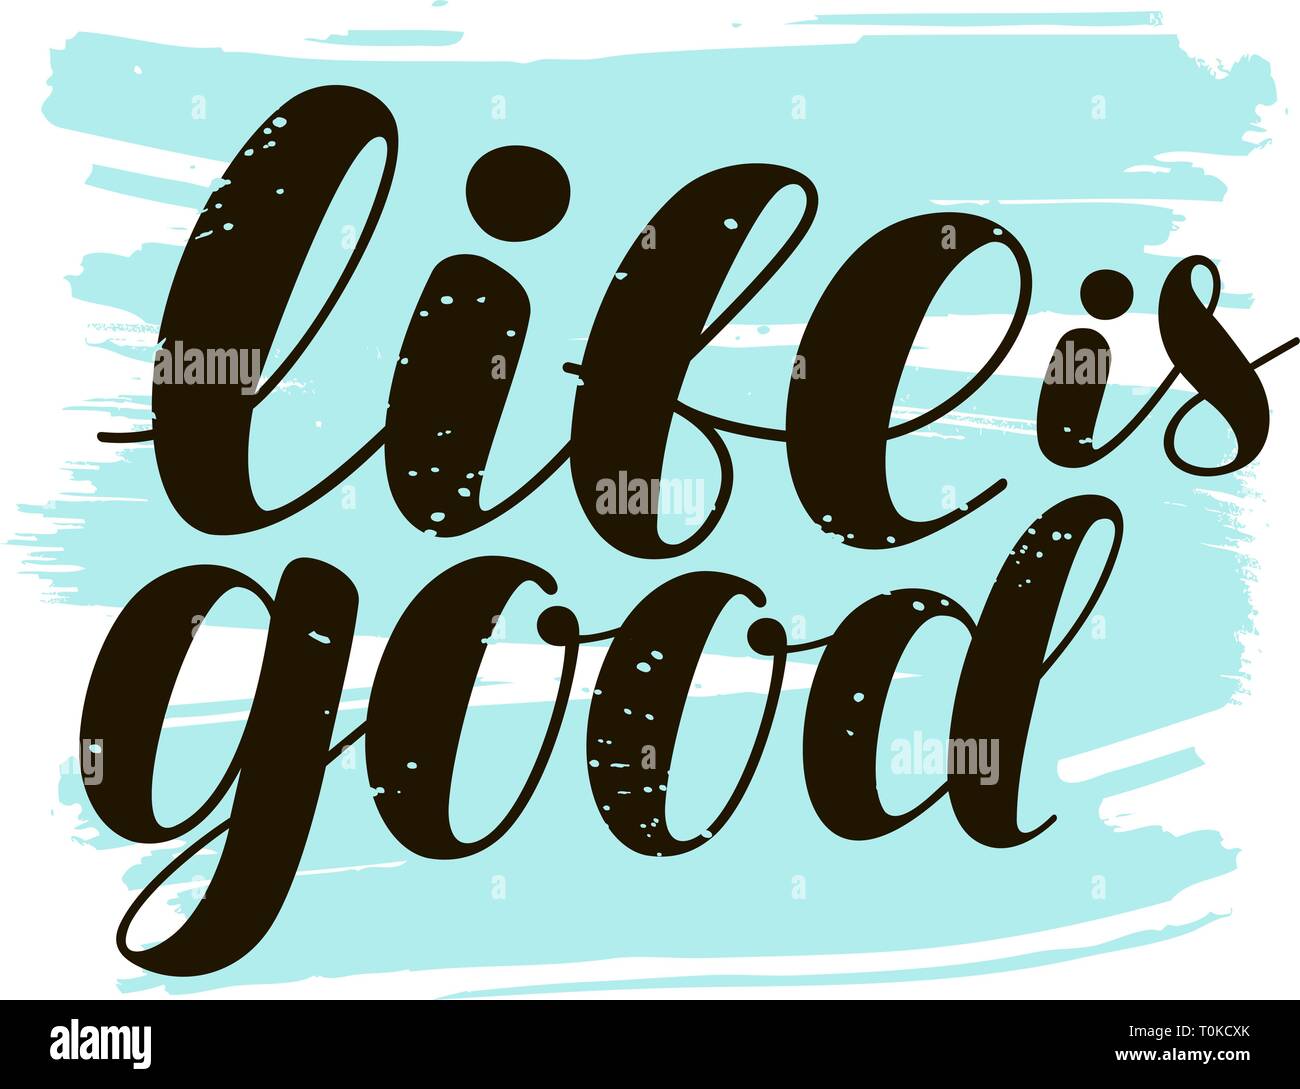 Life is good, lettering. Hand drawn positive quote, calligraphy vector illustration Stock Vector